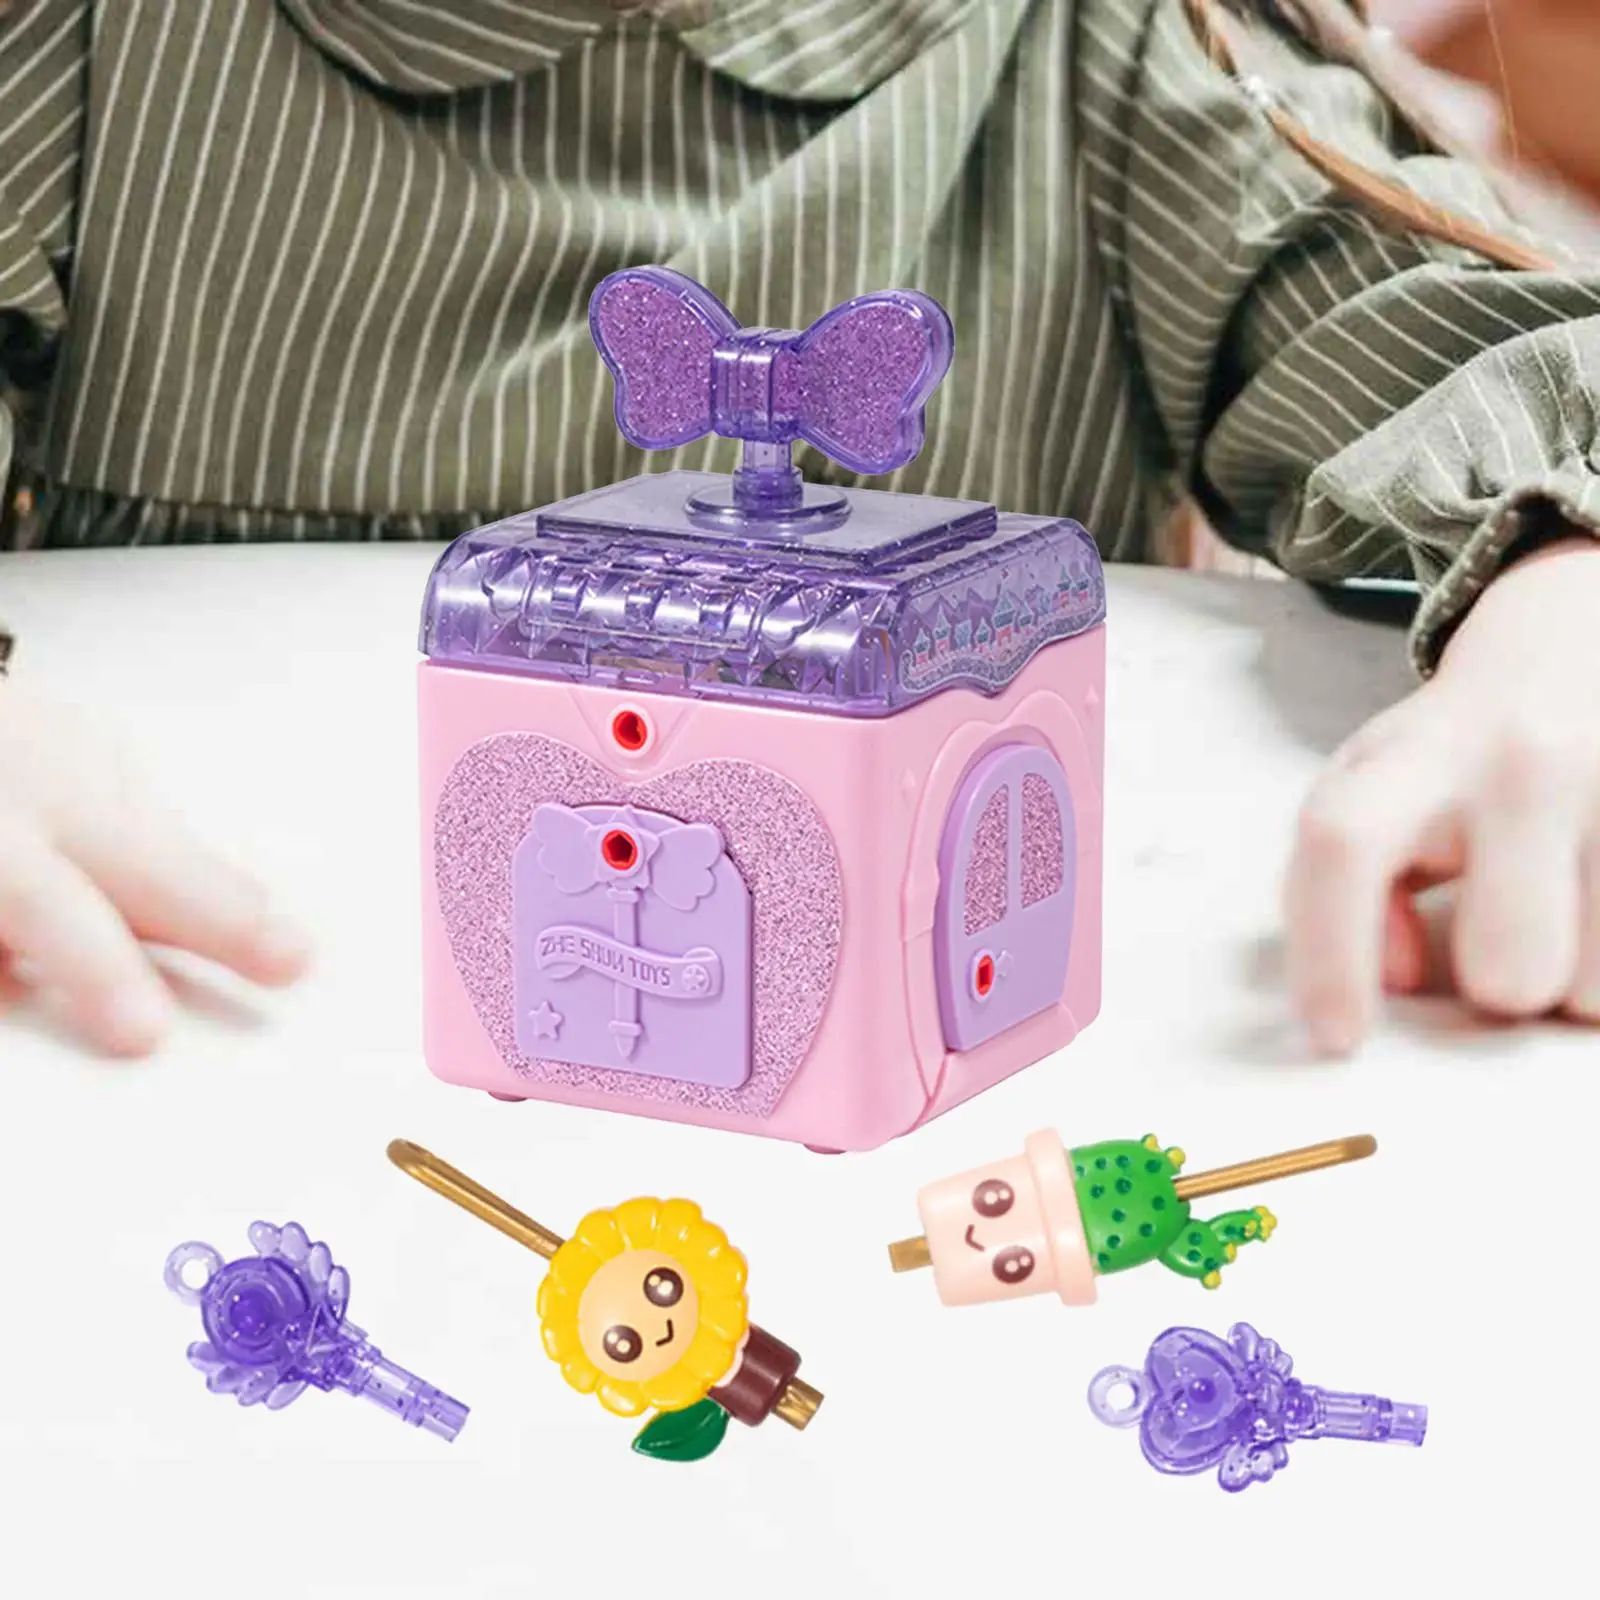 Unlock Jewellery Box Find The Jewels Party House Educational Toy Puzzle Surprise Treasure Chest for Girls Festival Gift